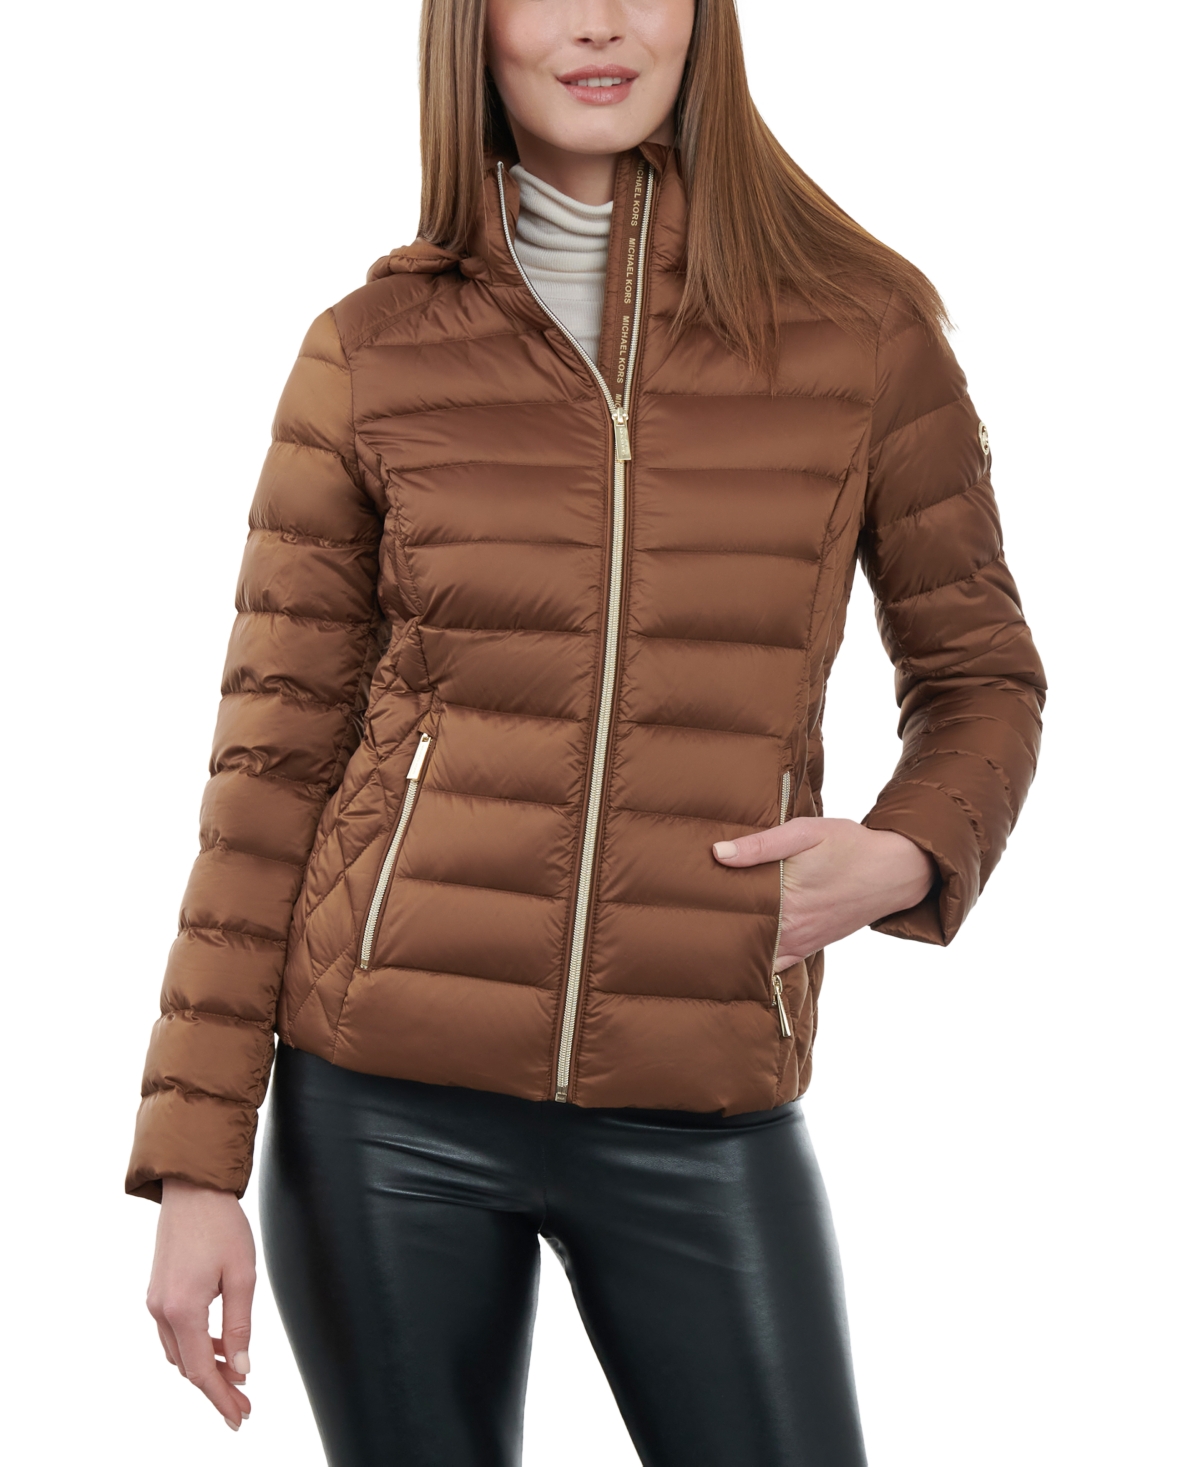 Michael Michael Kors Women's Hooded Packable Down Puffer Coat, Created for Macy's - Luggage